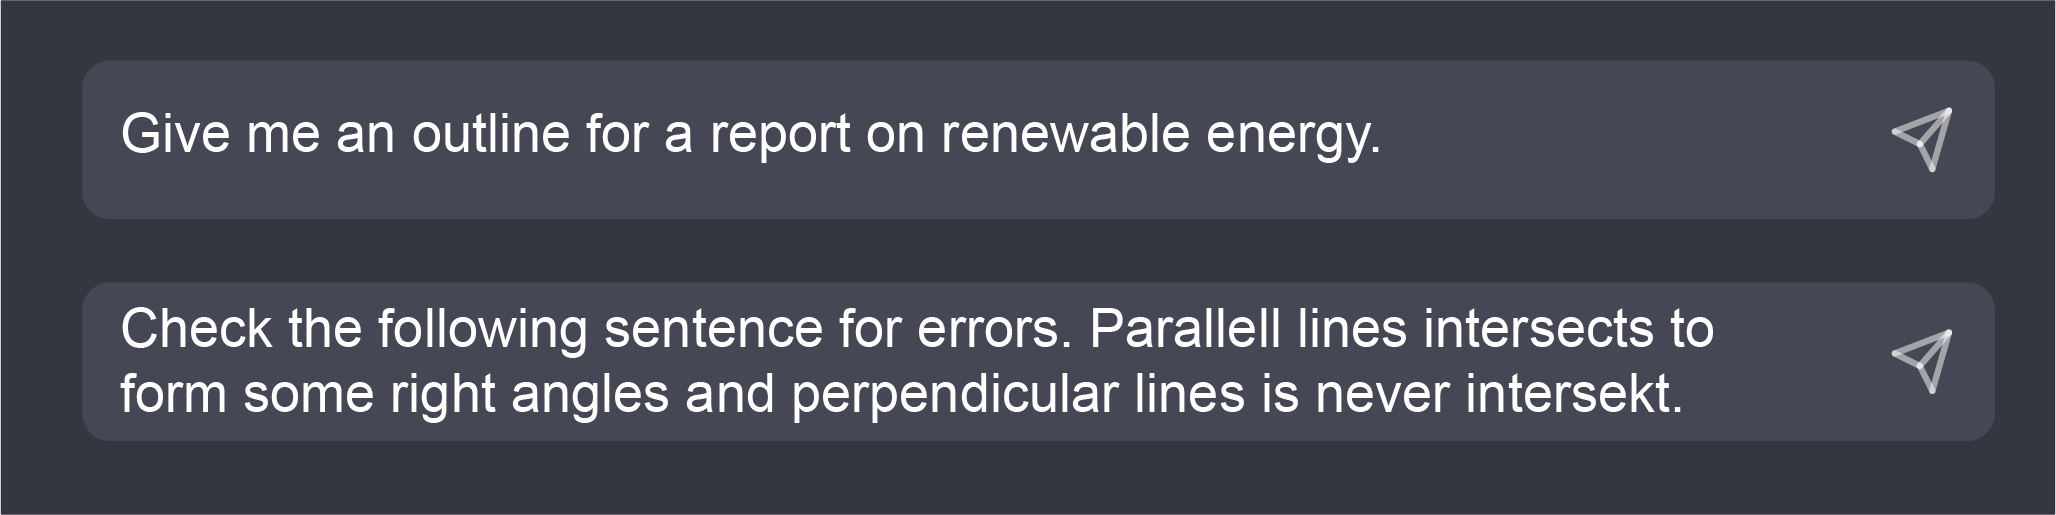 Prompts: Give me an outline for a report on renewable energy. Check the following sentence for errors. Parallell lines intersects to form some right angles and perpendicular lines is never intersekt.